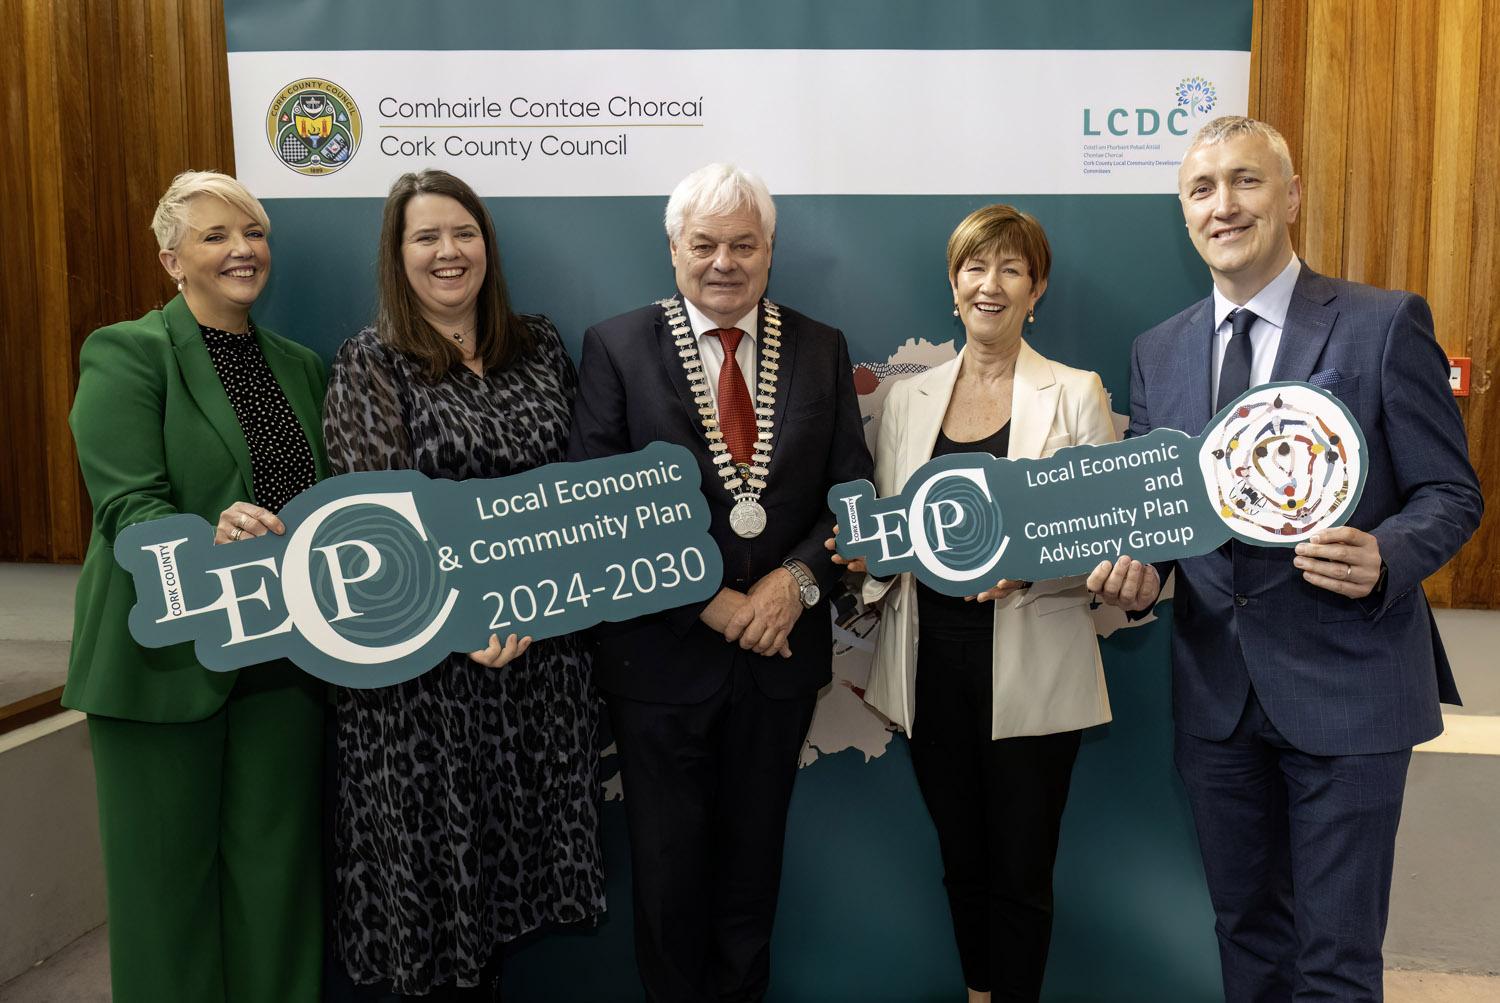 Patricia Liddy, Director of Services Municipal Districts, Loraine Lynch, Divisional Manager West, Cork County Council, Mayor of the County of Cork, Cllr Frank O’Flynn, Sharon Corcoran, Director of Economic Development, Enterprise and Tourism and Padraig Barrett, Director of Services Planning at the Official Launch of the Cork County Local Economic and Community Plan 2024-2030.